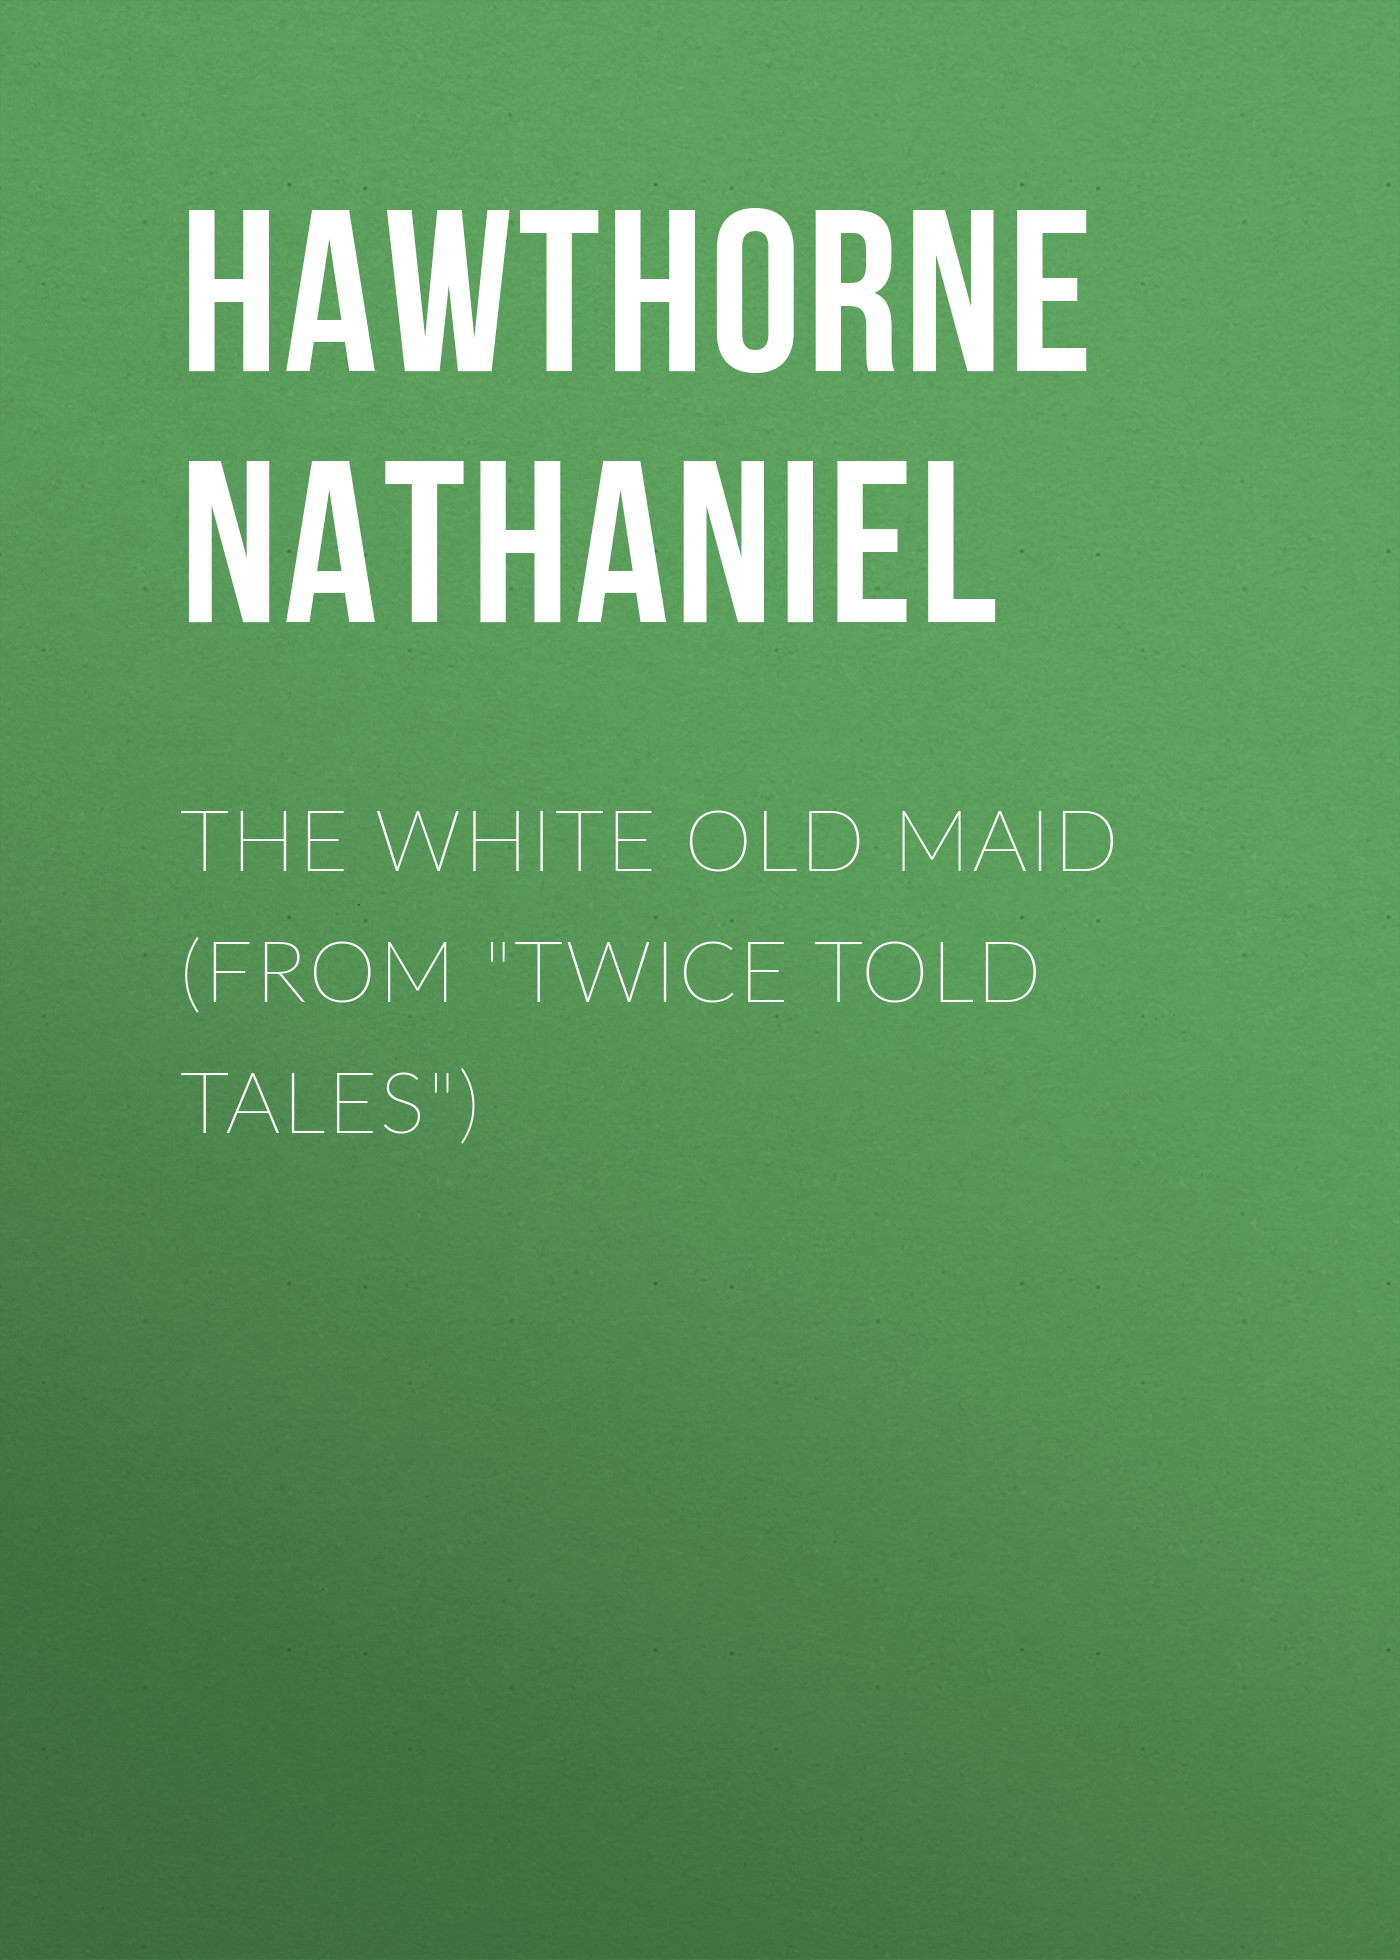 The White Old Maid (From"Twice Told Tales")